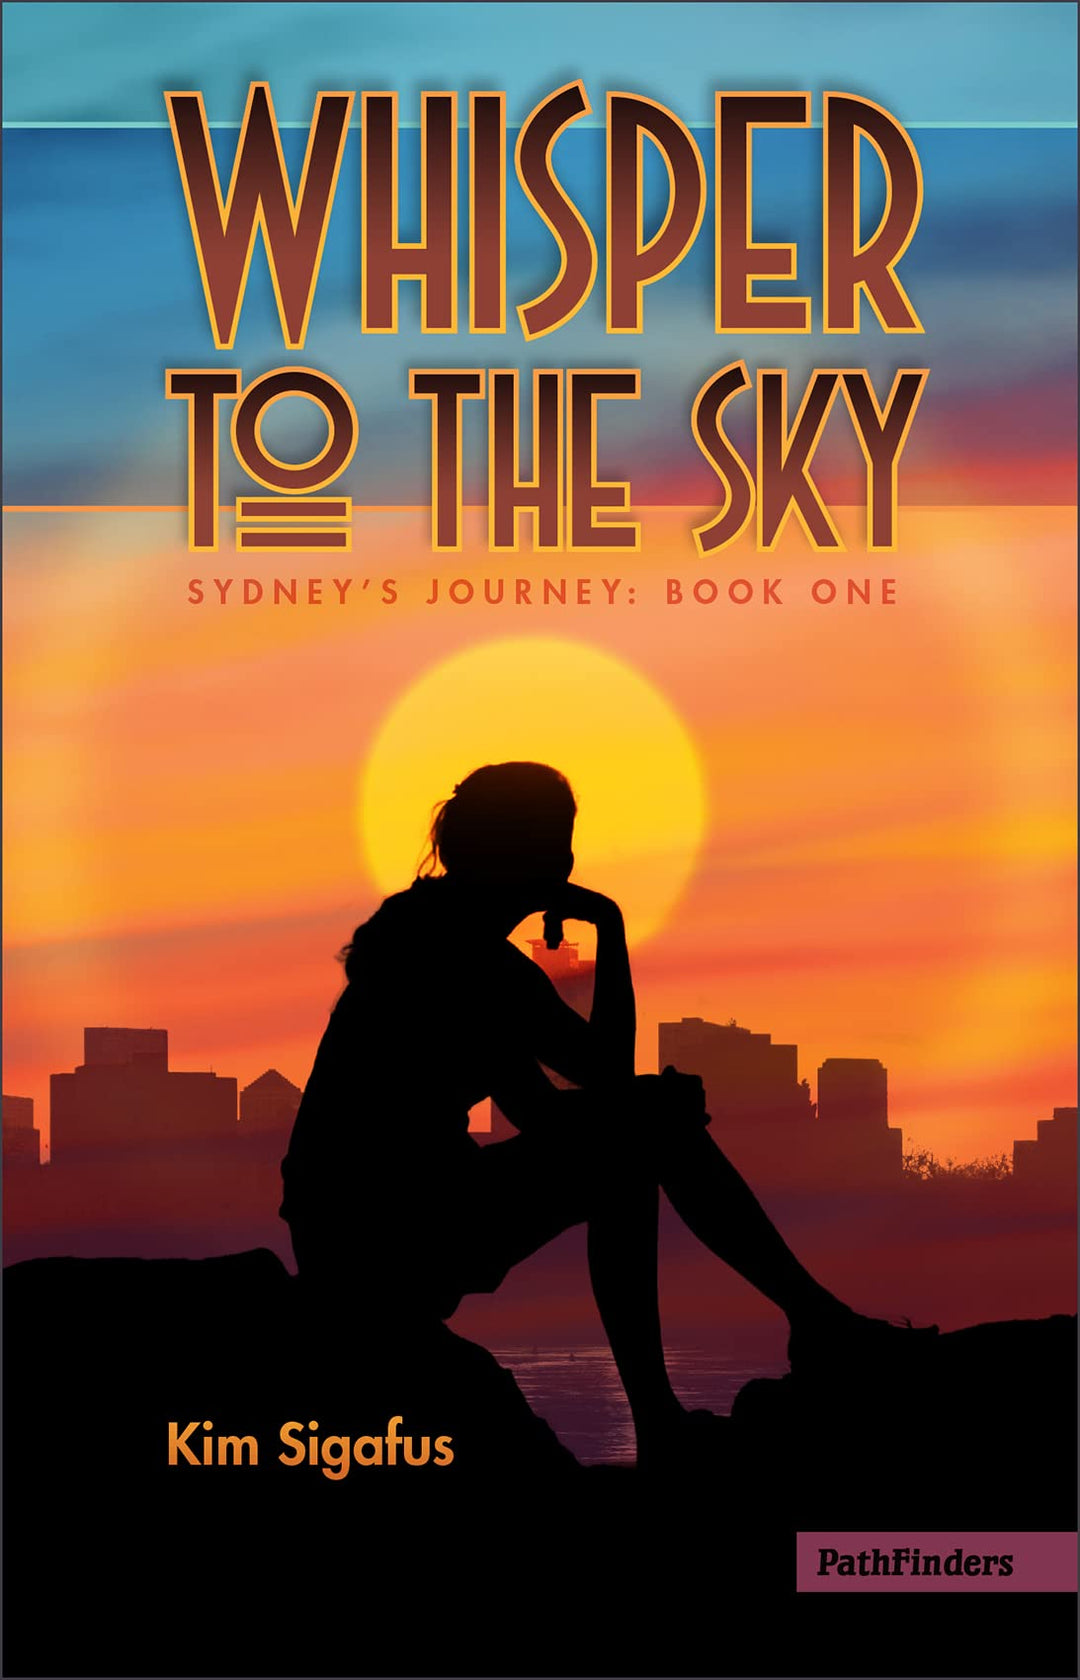 Whisper to the Sky (Sydney's Journey: Book One) by Kim Sigafus